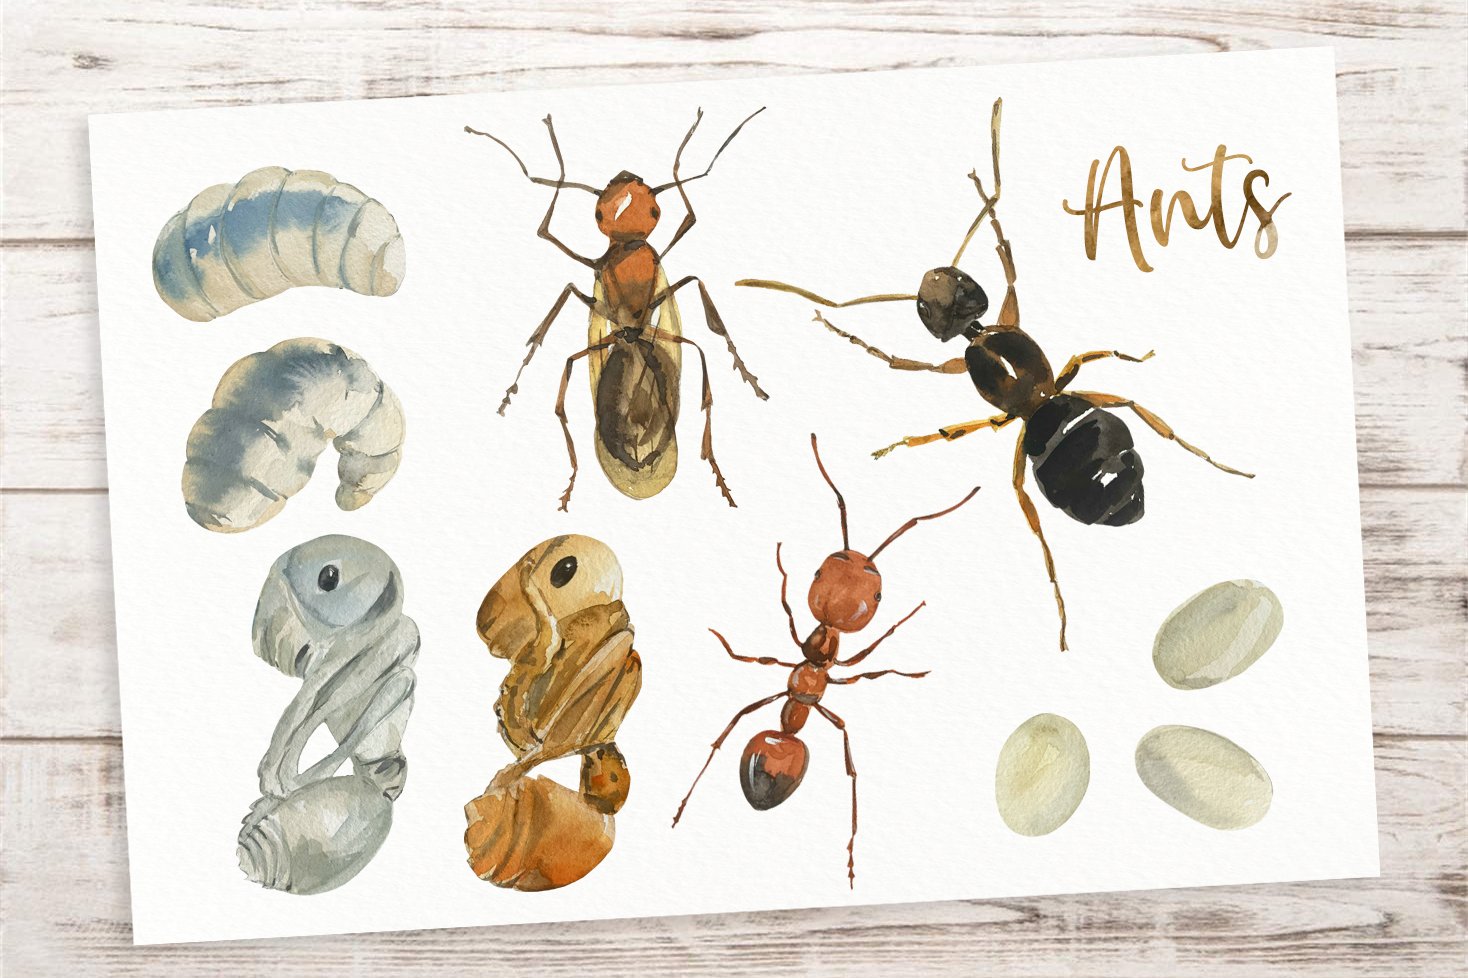 Watercolor ant life cycle illustration.